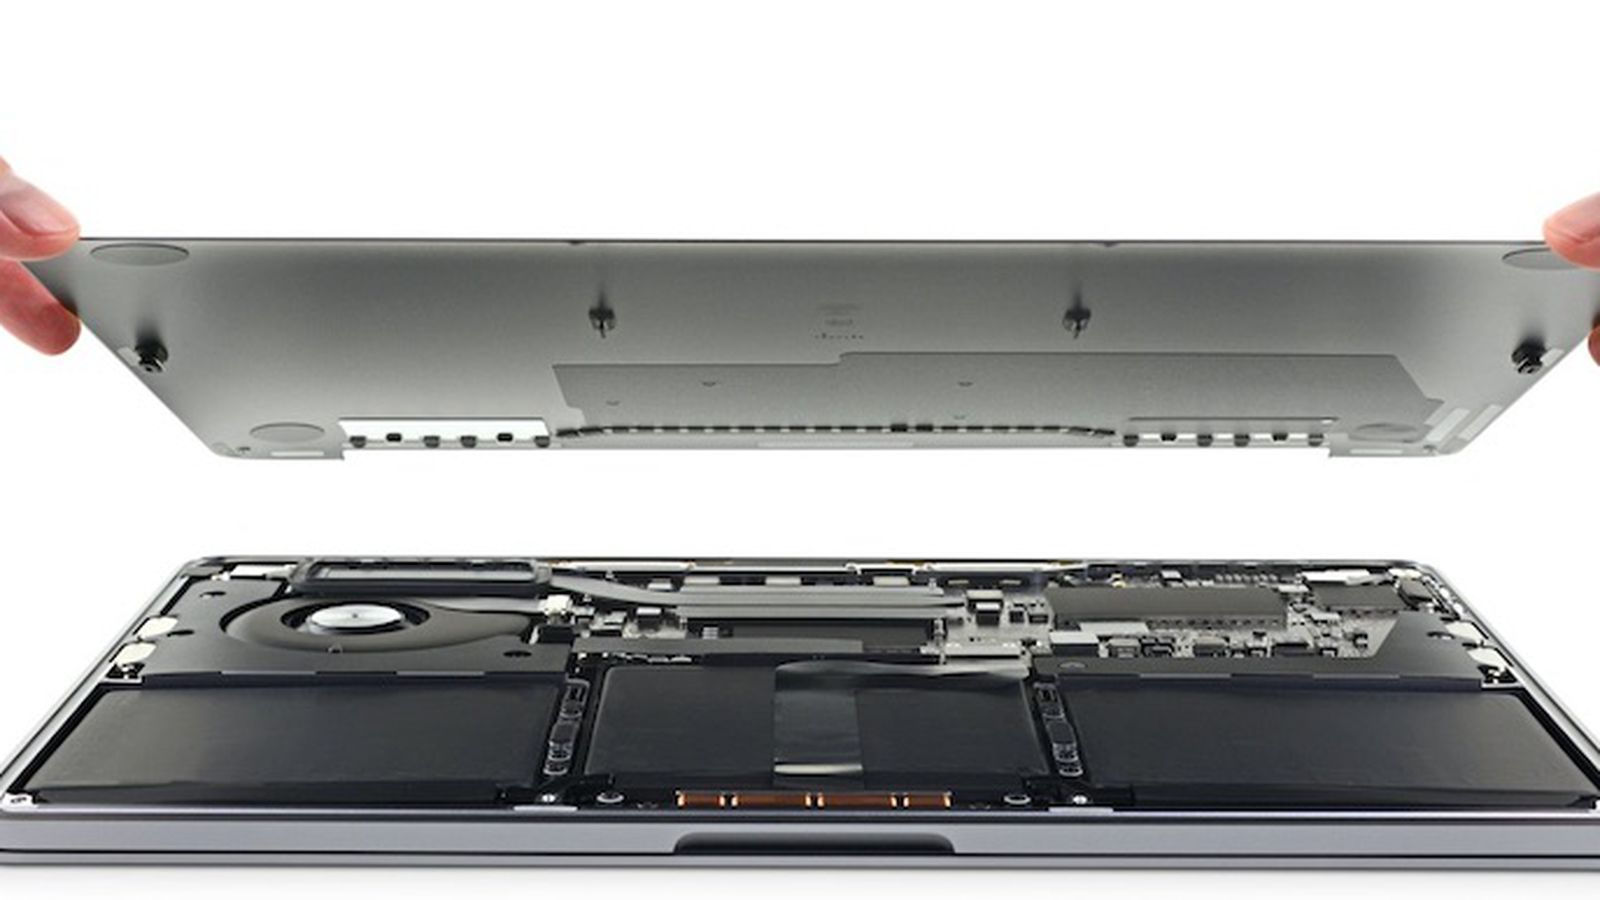 Base 19 13 Inch Macbook Pro Teardown Reveals Larger Battery Soldered Down Ssd And Updated Keyboard Material Macrumors